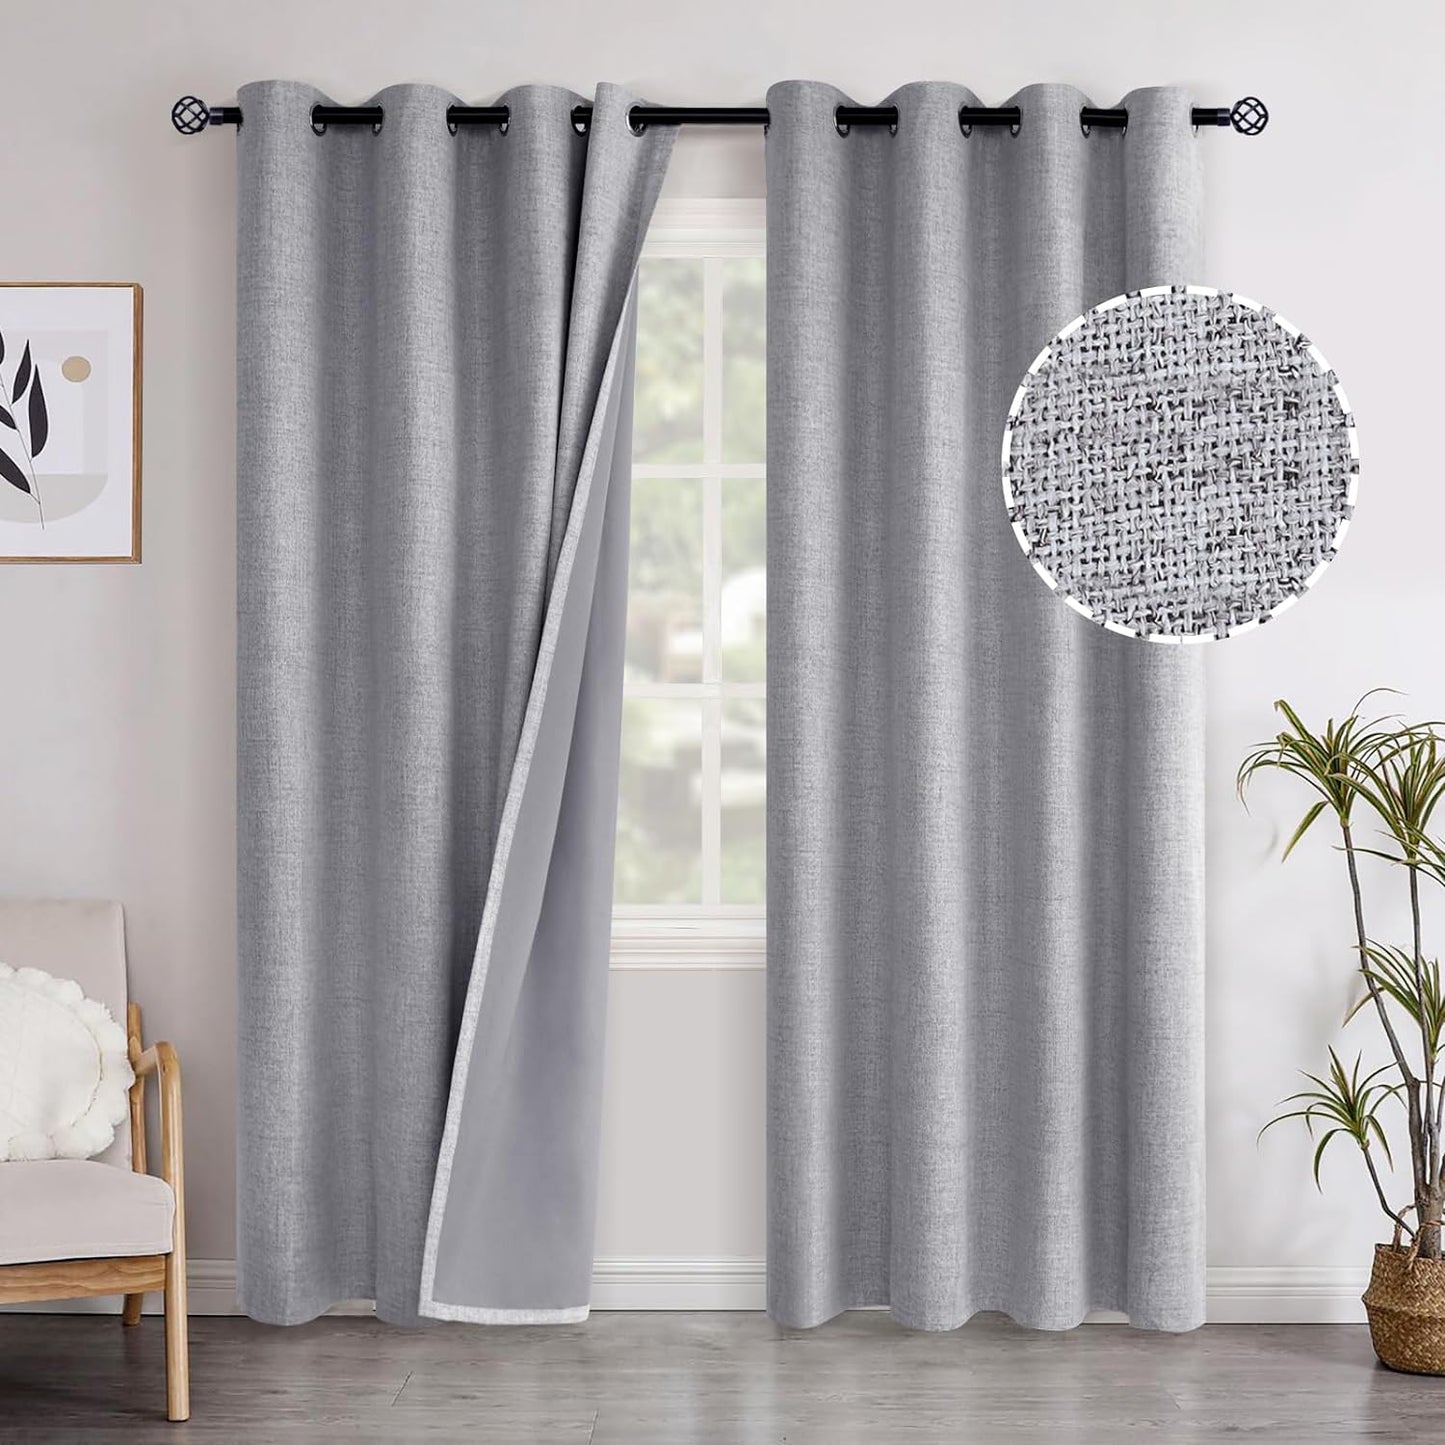 Youngstex Linen Blackout Curtains 63 Inch Length, Grommet Darkening Bedroom Curtains Burlap Linen Window Drapes Thermal Insulated for Basement Summer Heat, 2 Panels, 52 X 63 Inch, Beige  YoungsTex Grey 52W X 95L 